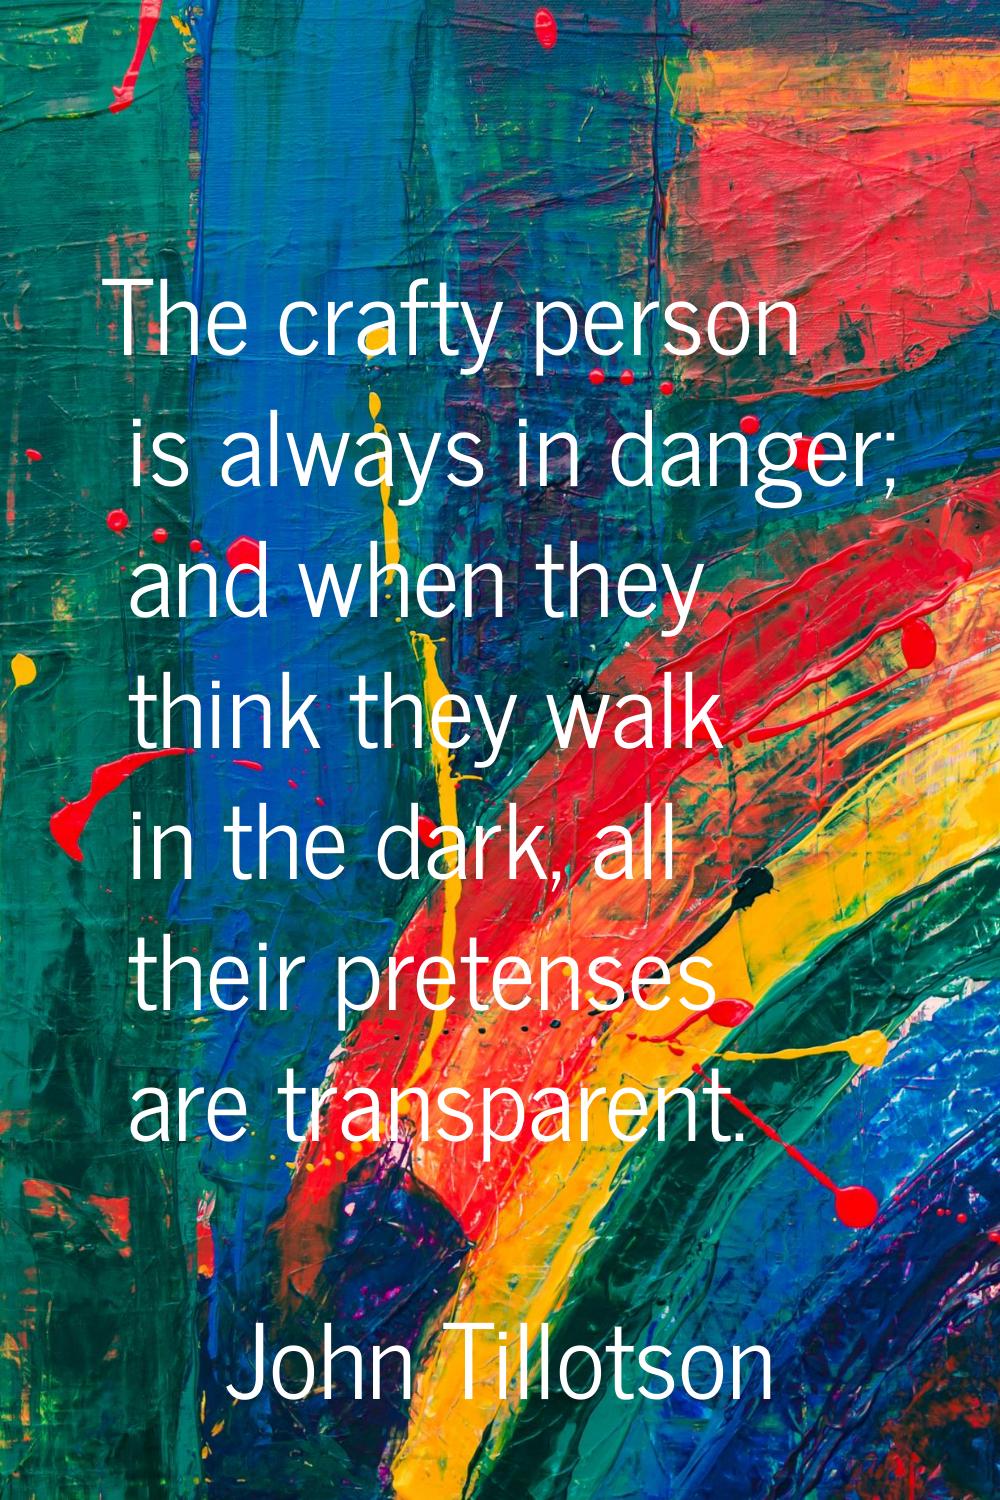 The crafty person is always in danger; and when they think they walk in the dark, all their pretens